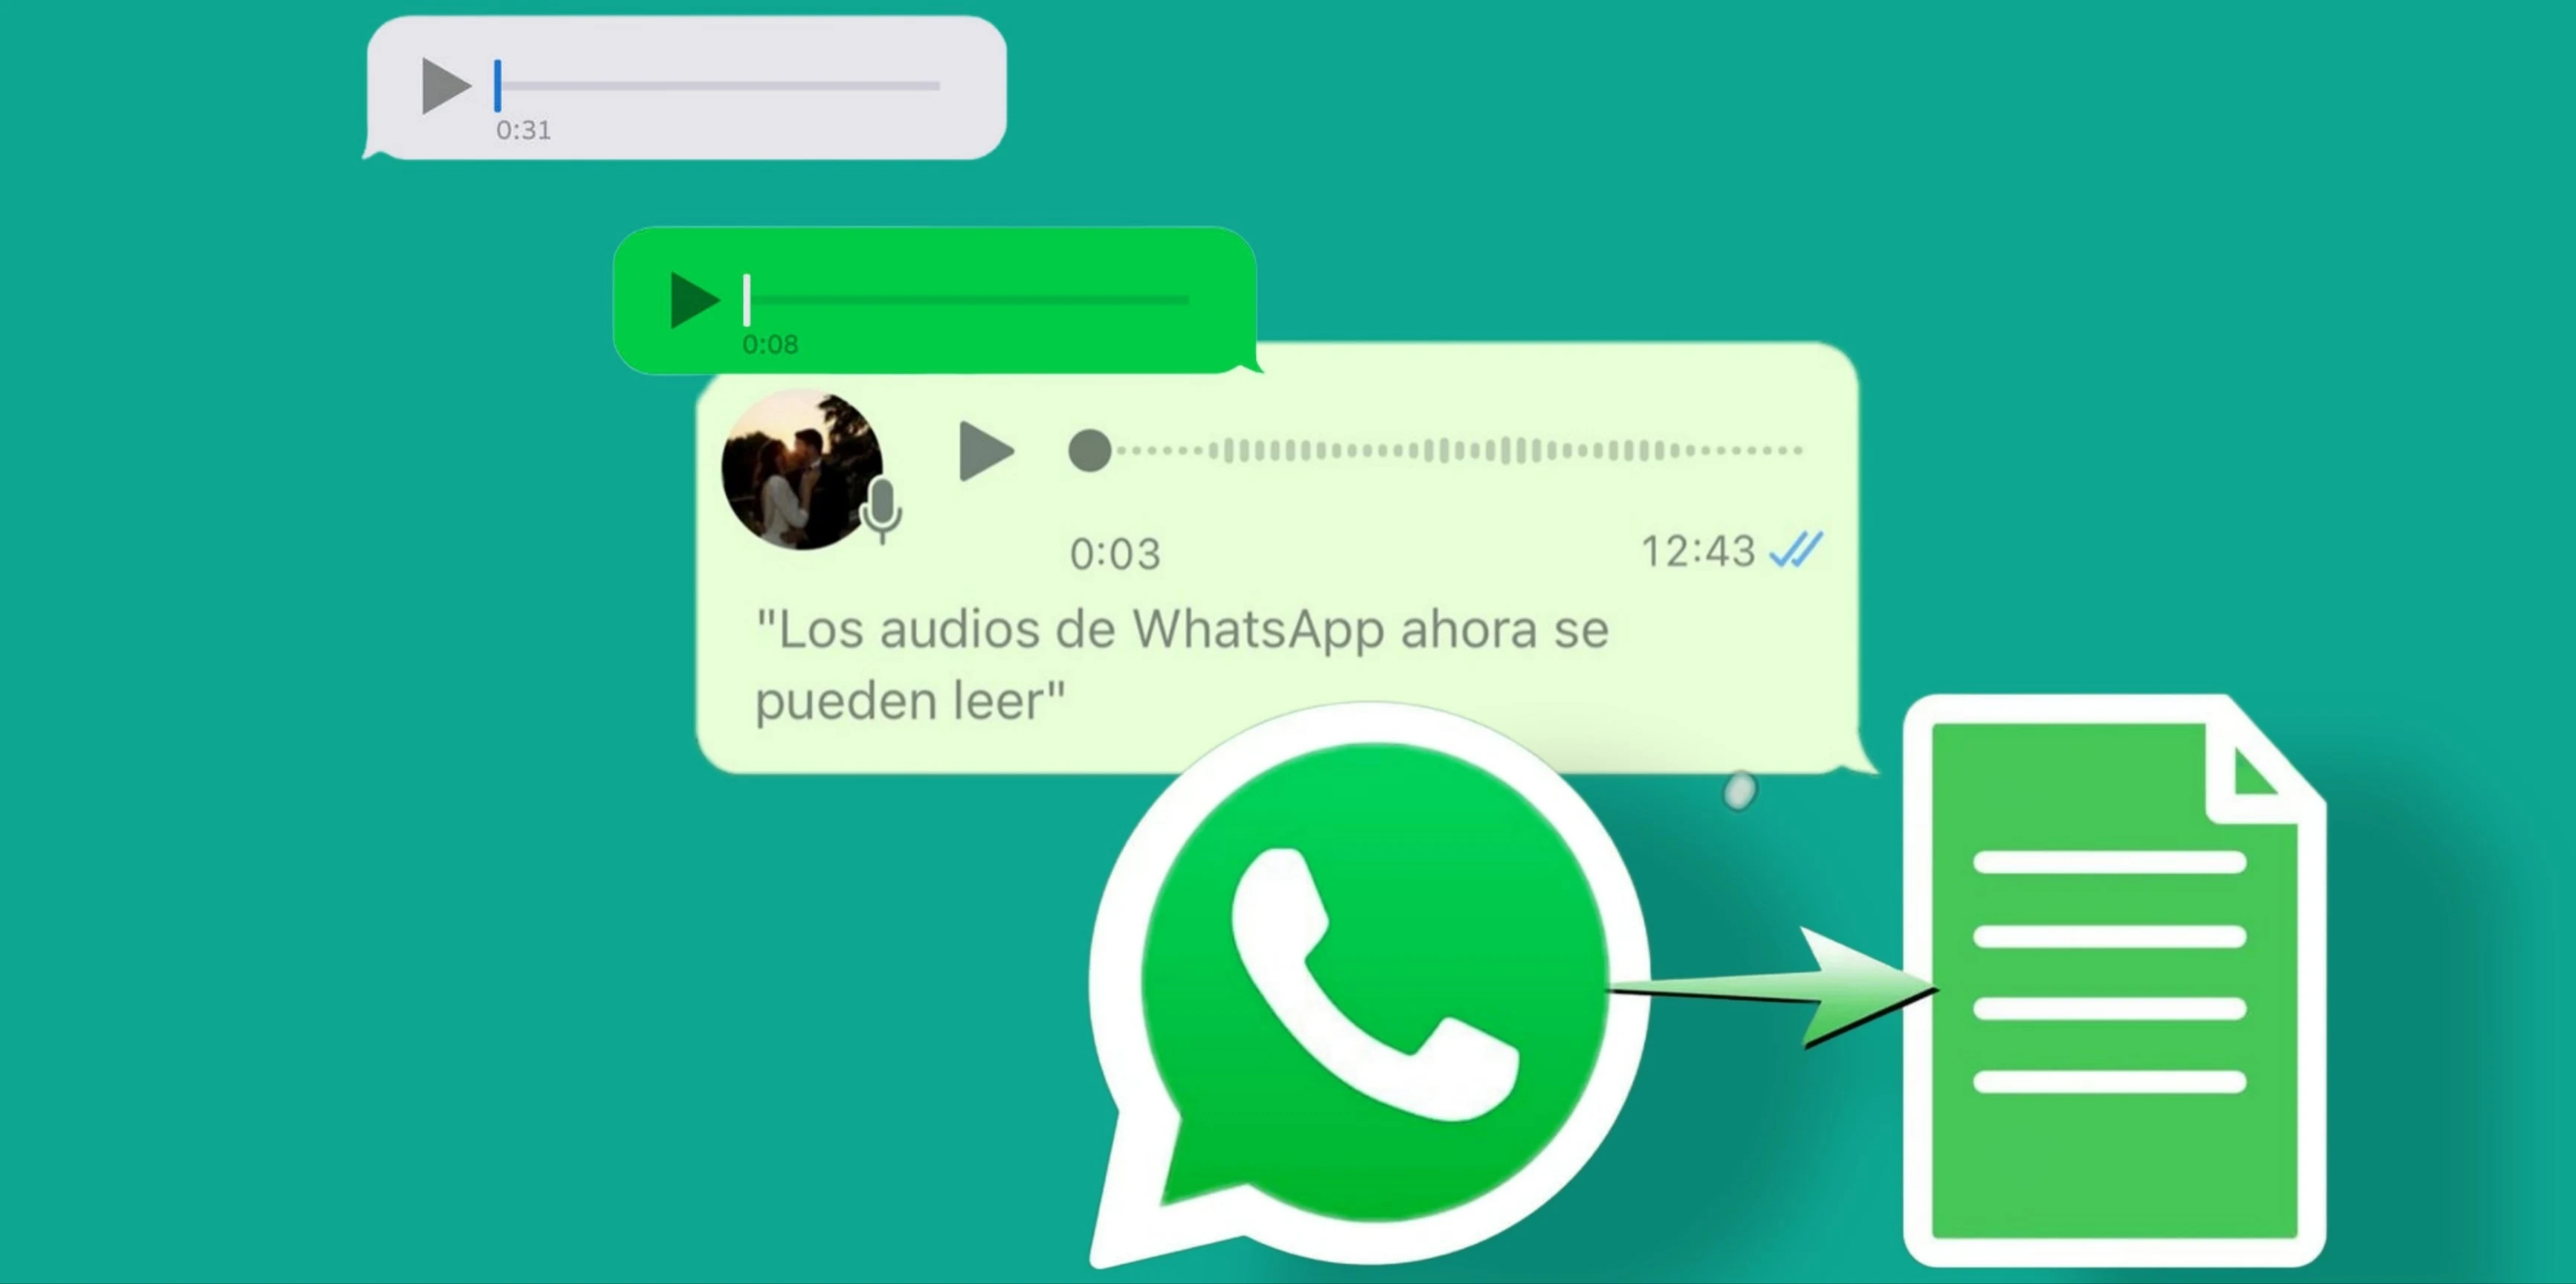 These are the two best ways to convert voice messages to text in WhatsApp